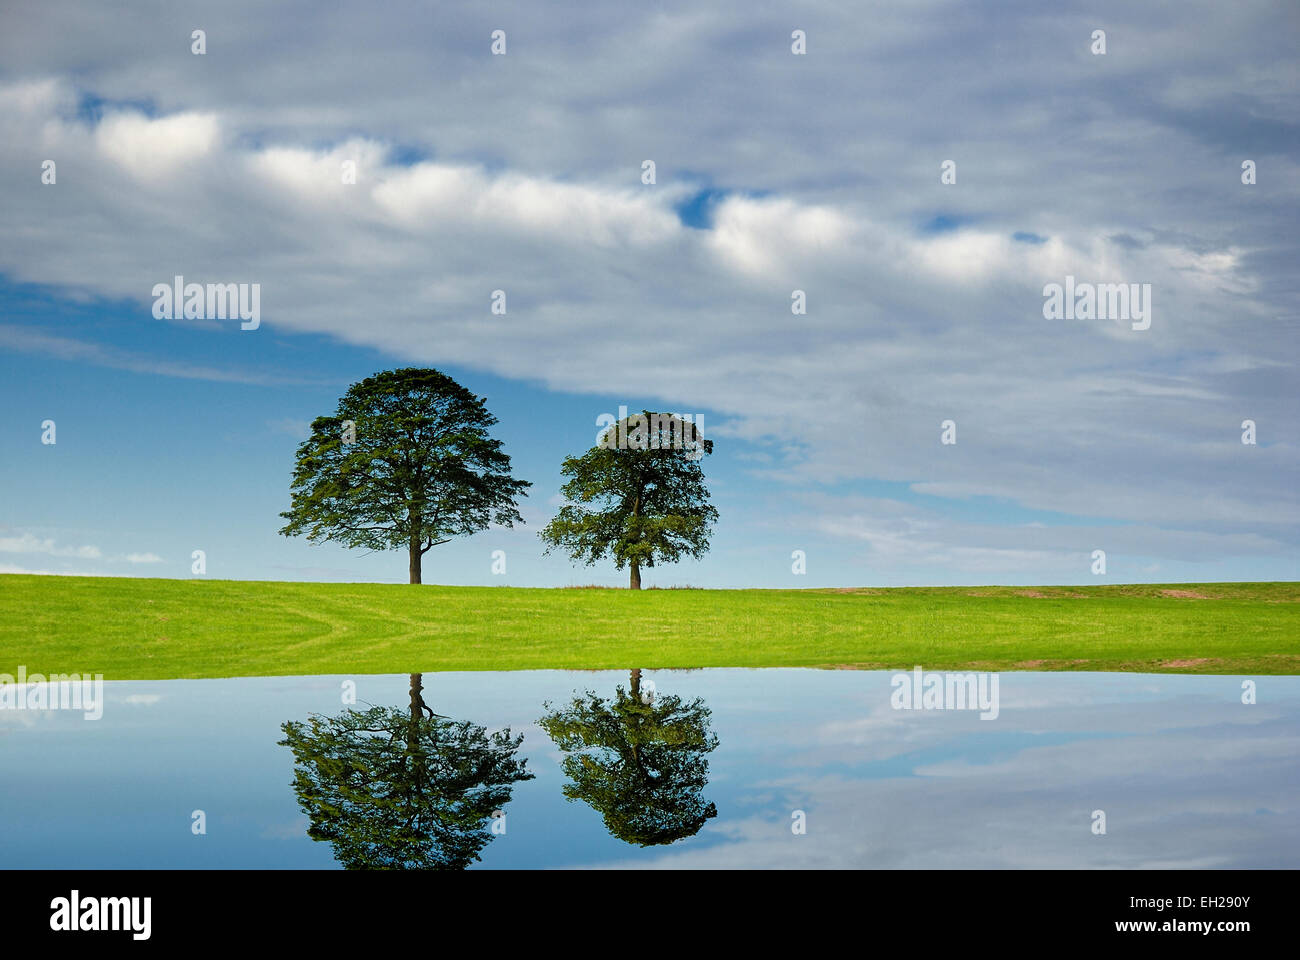 Two trees on a green field digitally mirrored into a pool of water Stock Photo